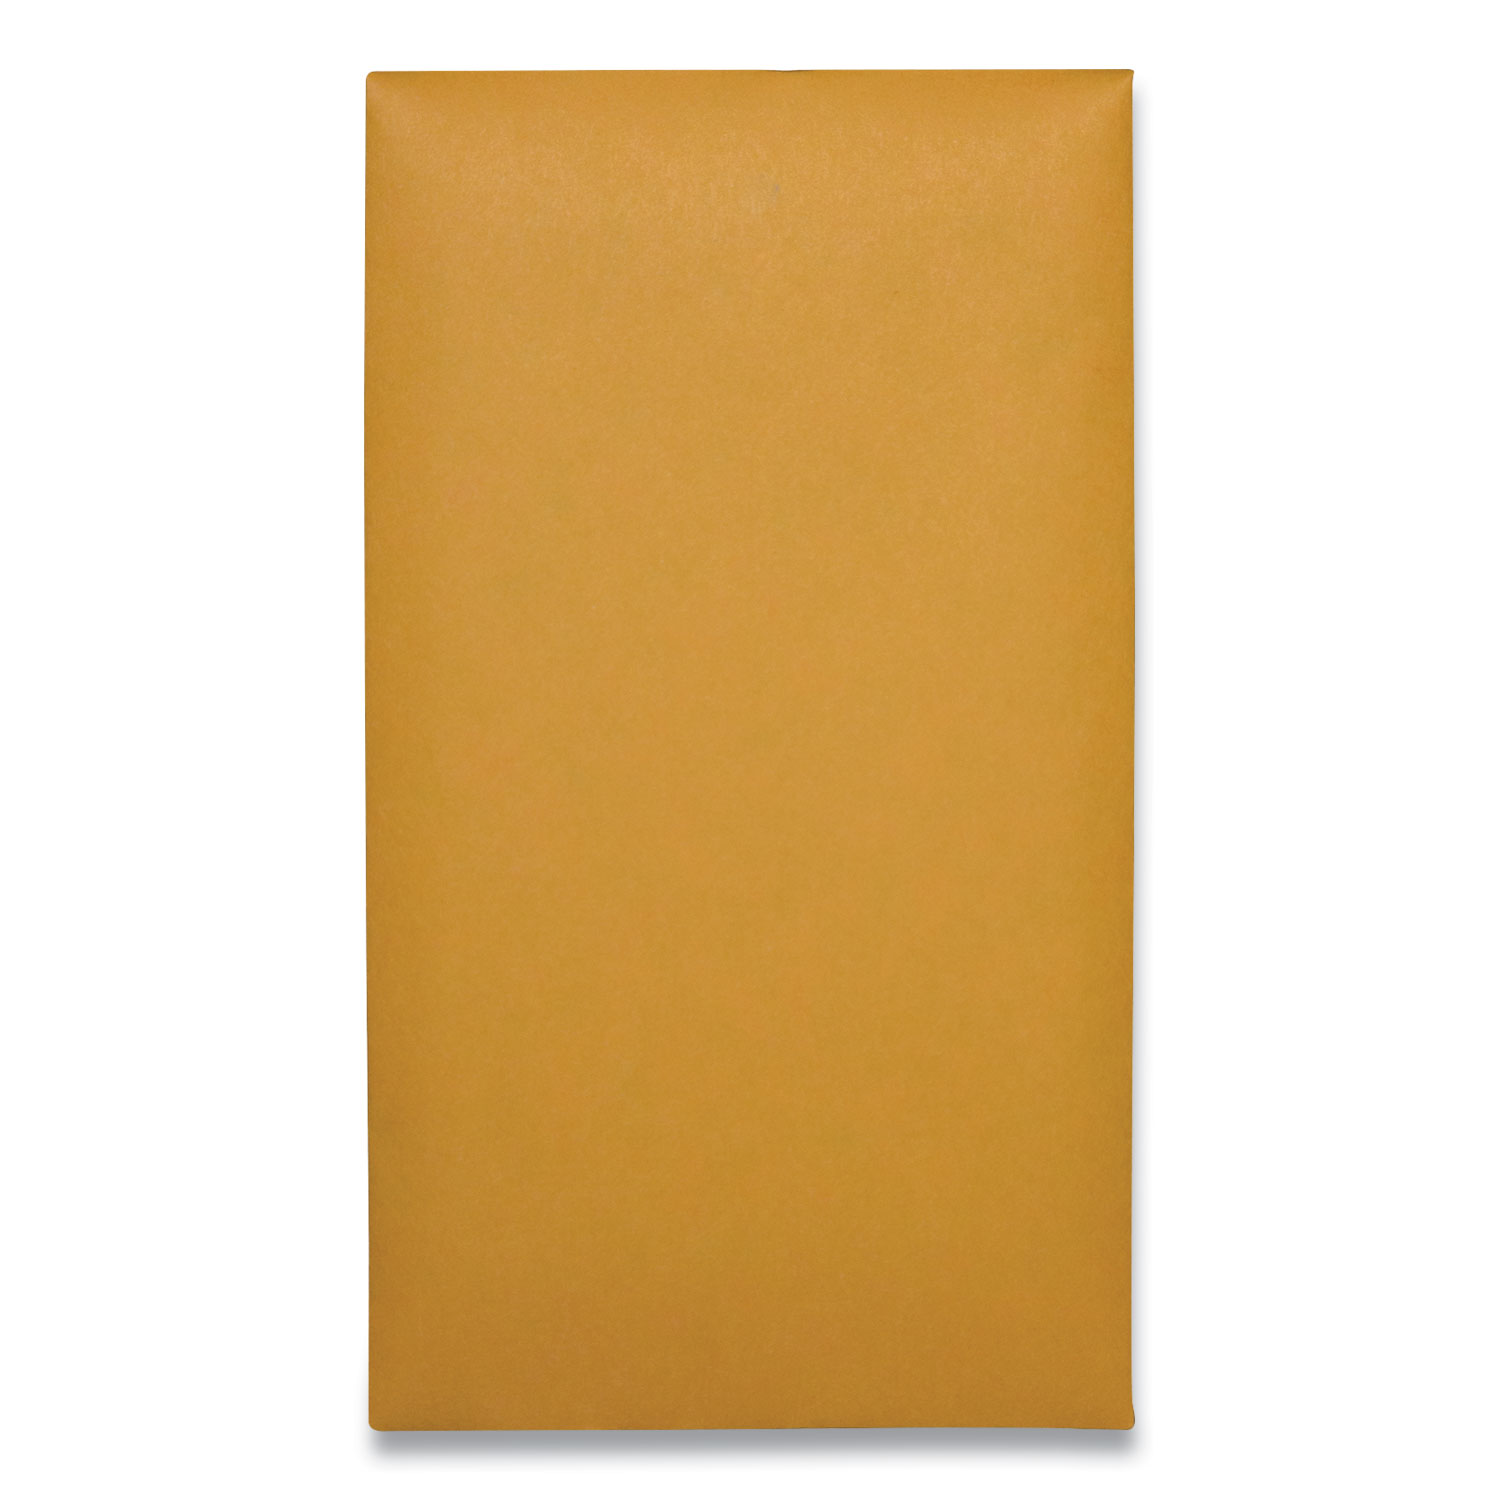 Quality Park™ Kraft Coin and Small Parts Envelope, #6, Cheese Blade Flap, Clasp/Gummed Closure, 3.38 x 6, Brown Kraft, 100/Box